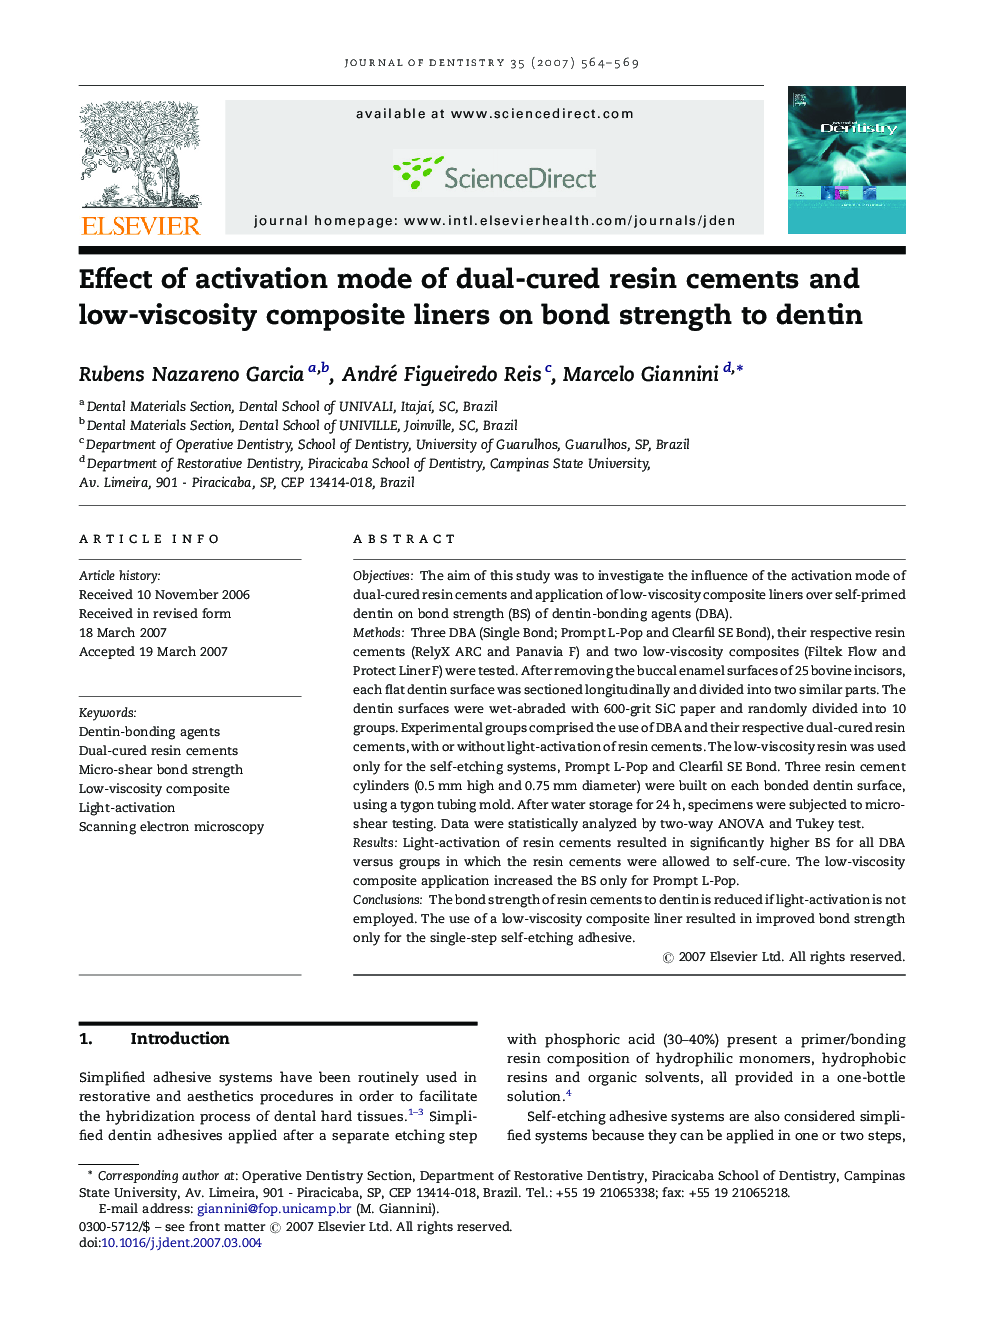 Effect of activation mode of dual-cured resin cements and low-viscosity composite liners on bond strength to dentin